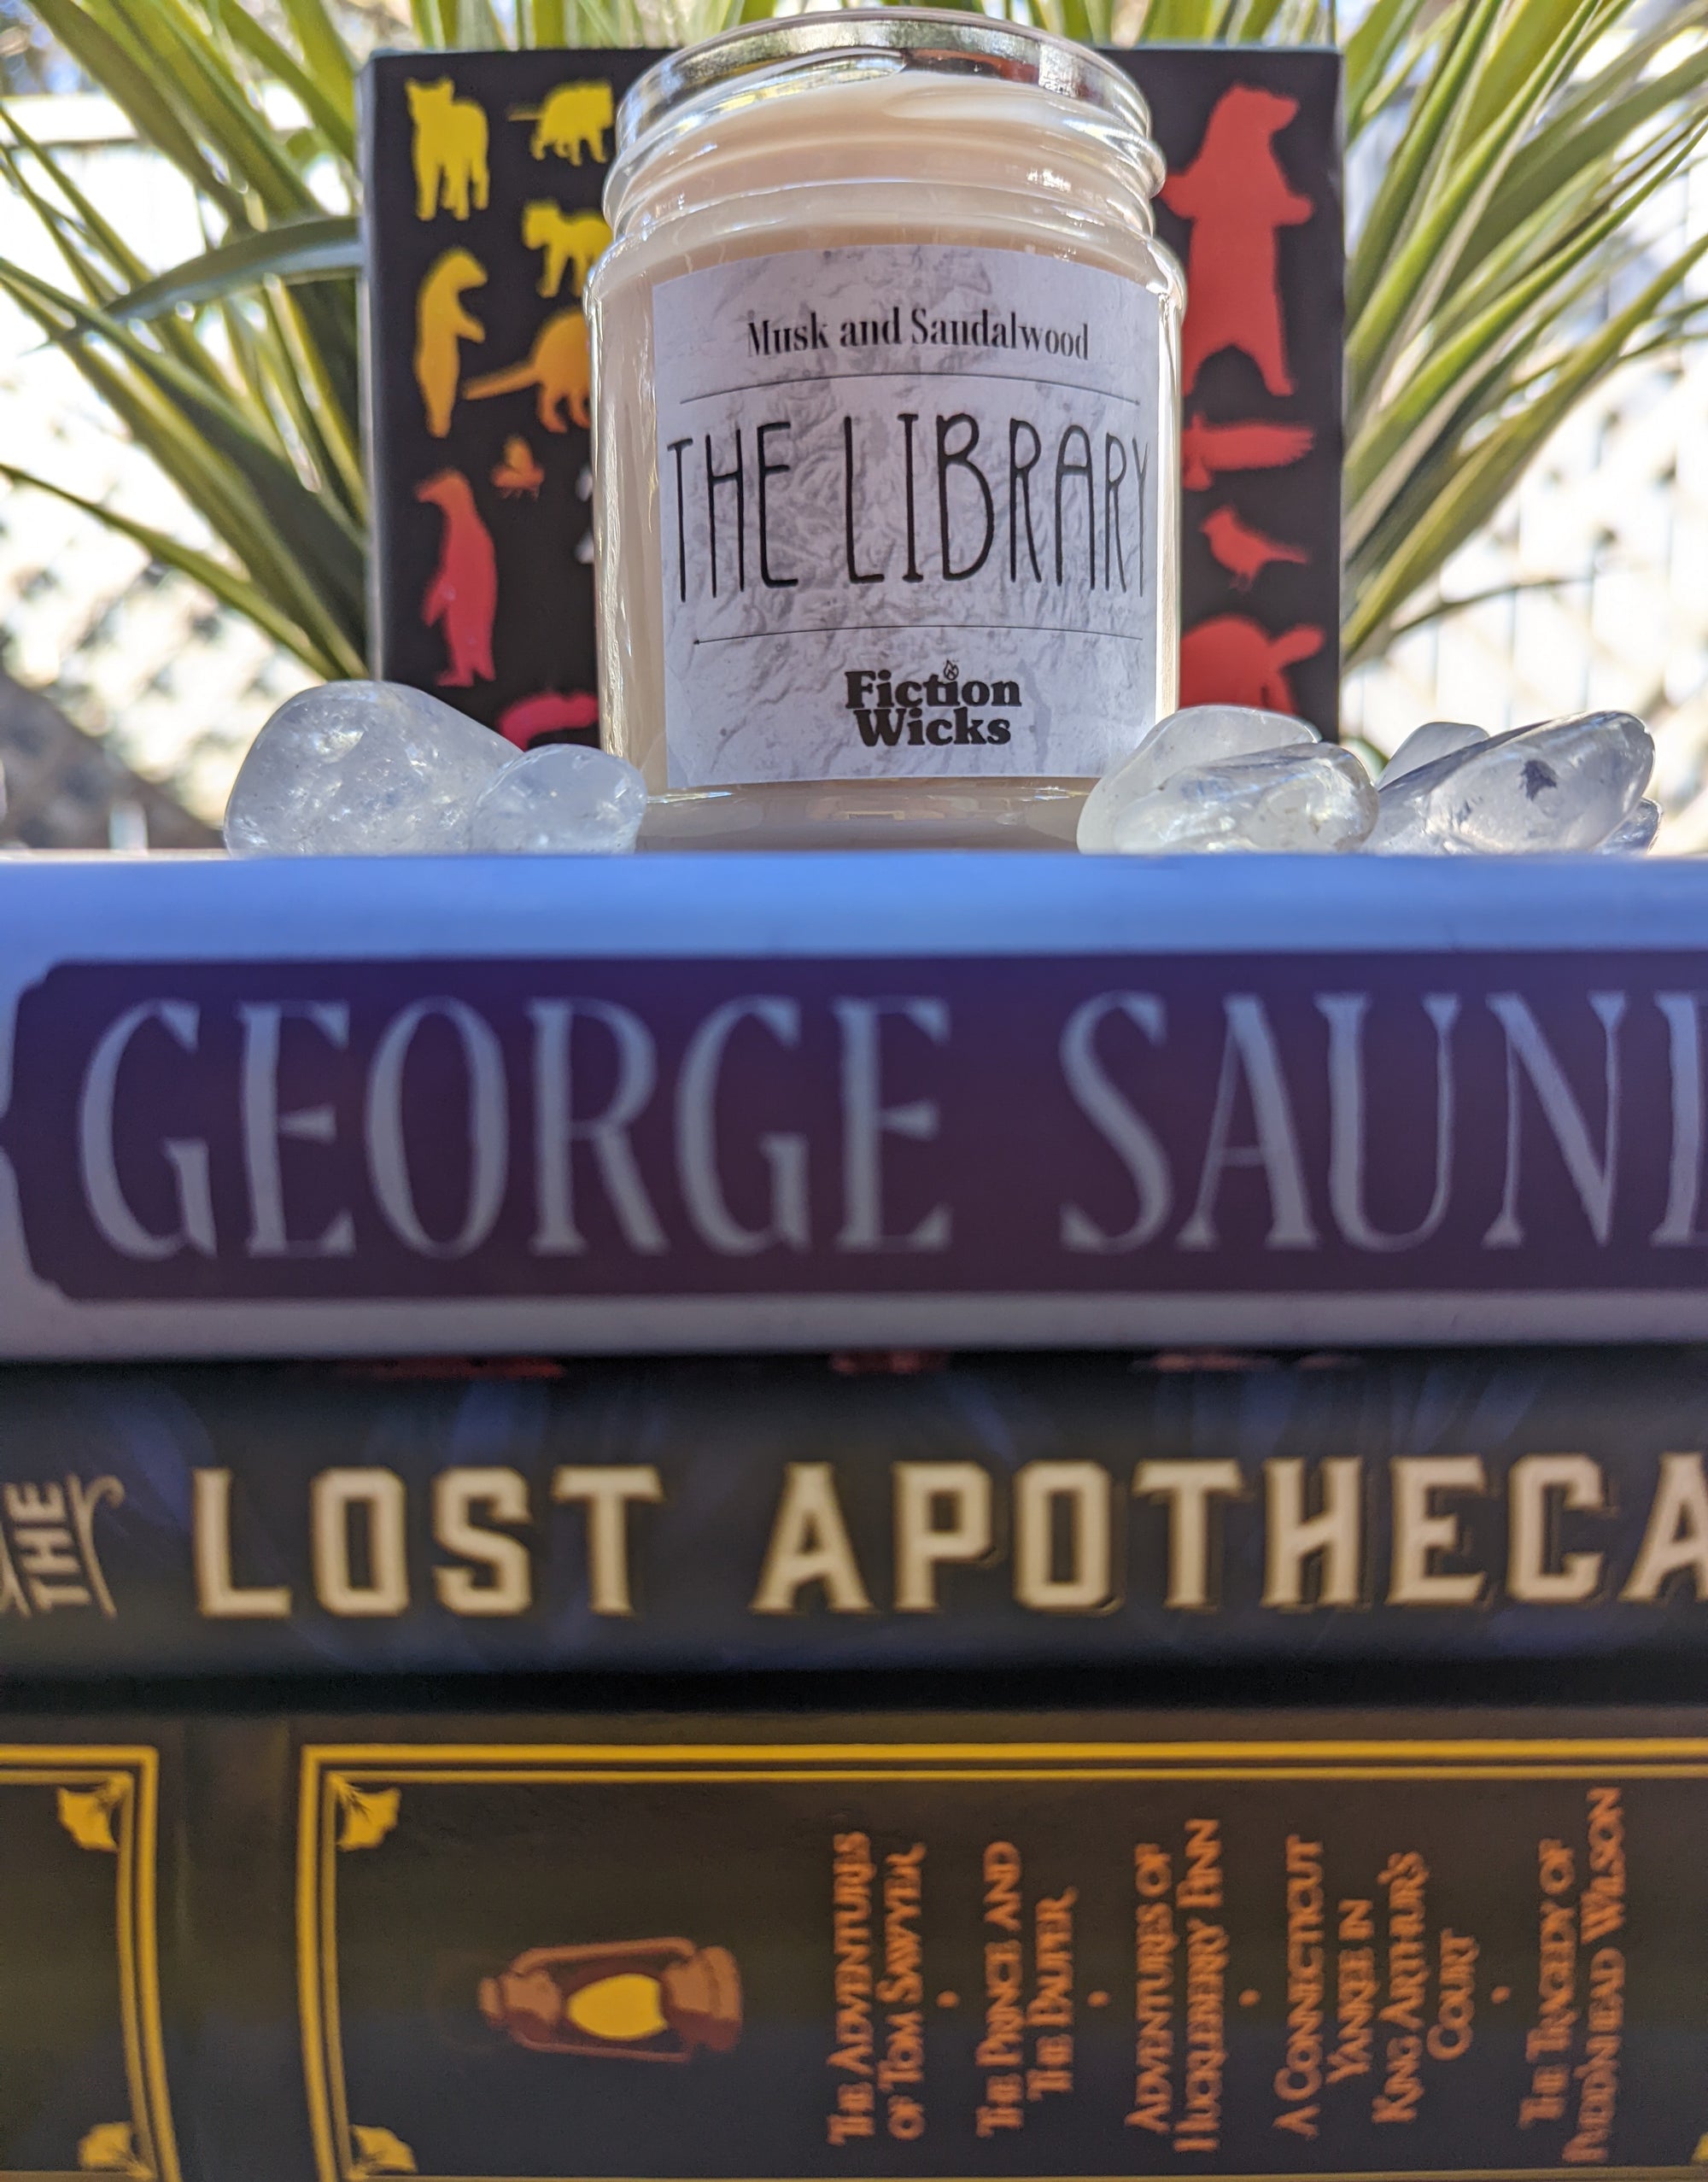 The Library: Musk &amp; Sandalwood Candle